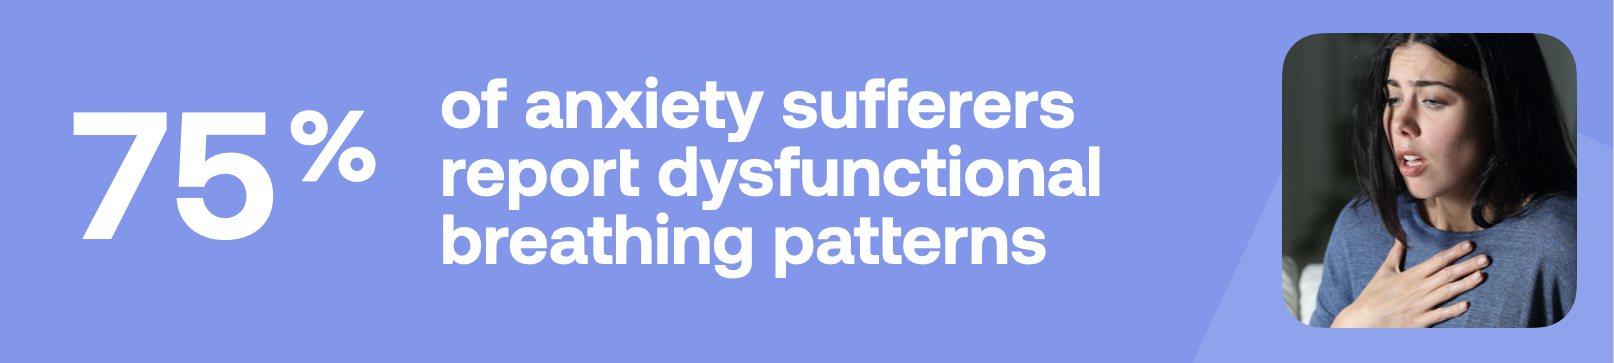 75% of anxiety sufferers report dysfunctional breathing patterns